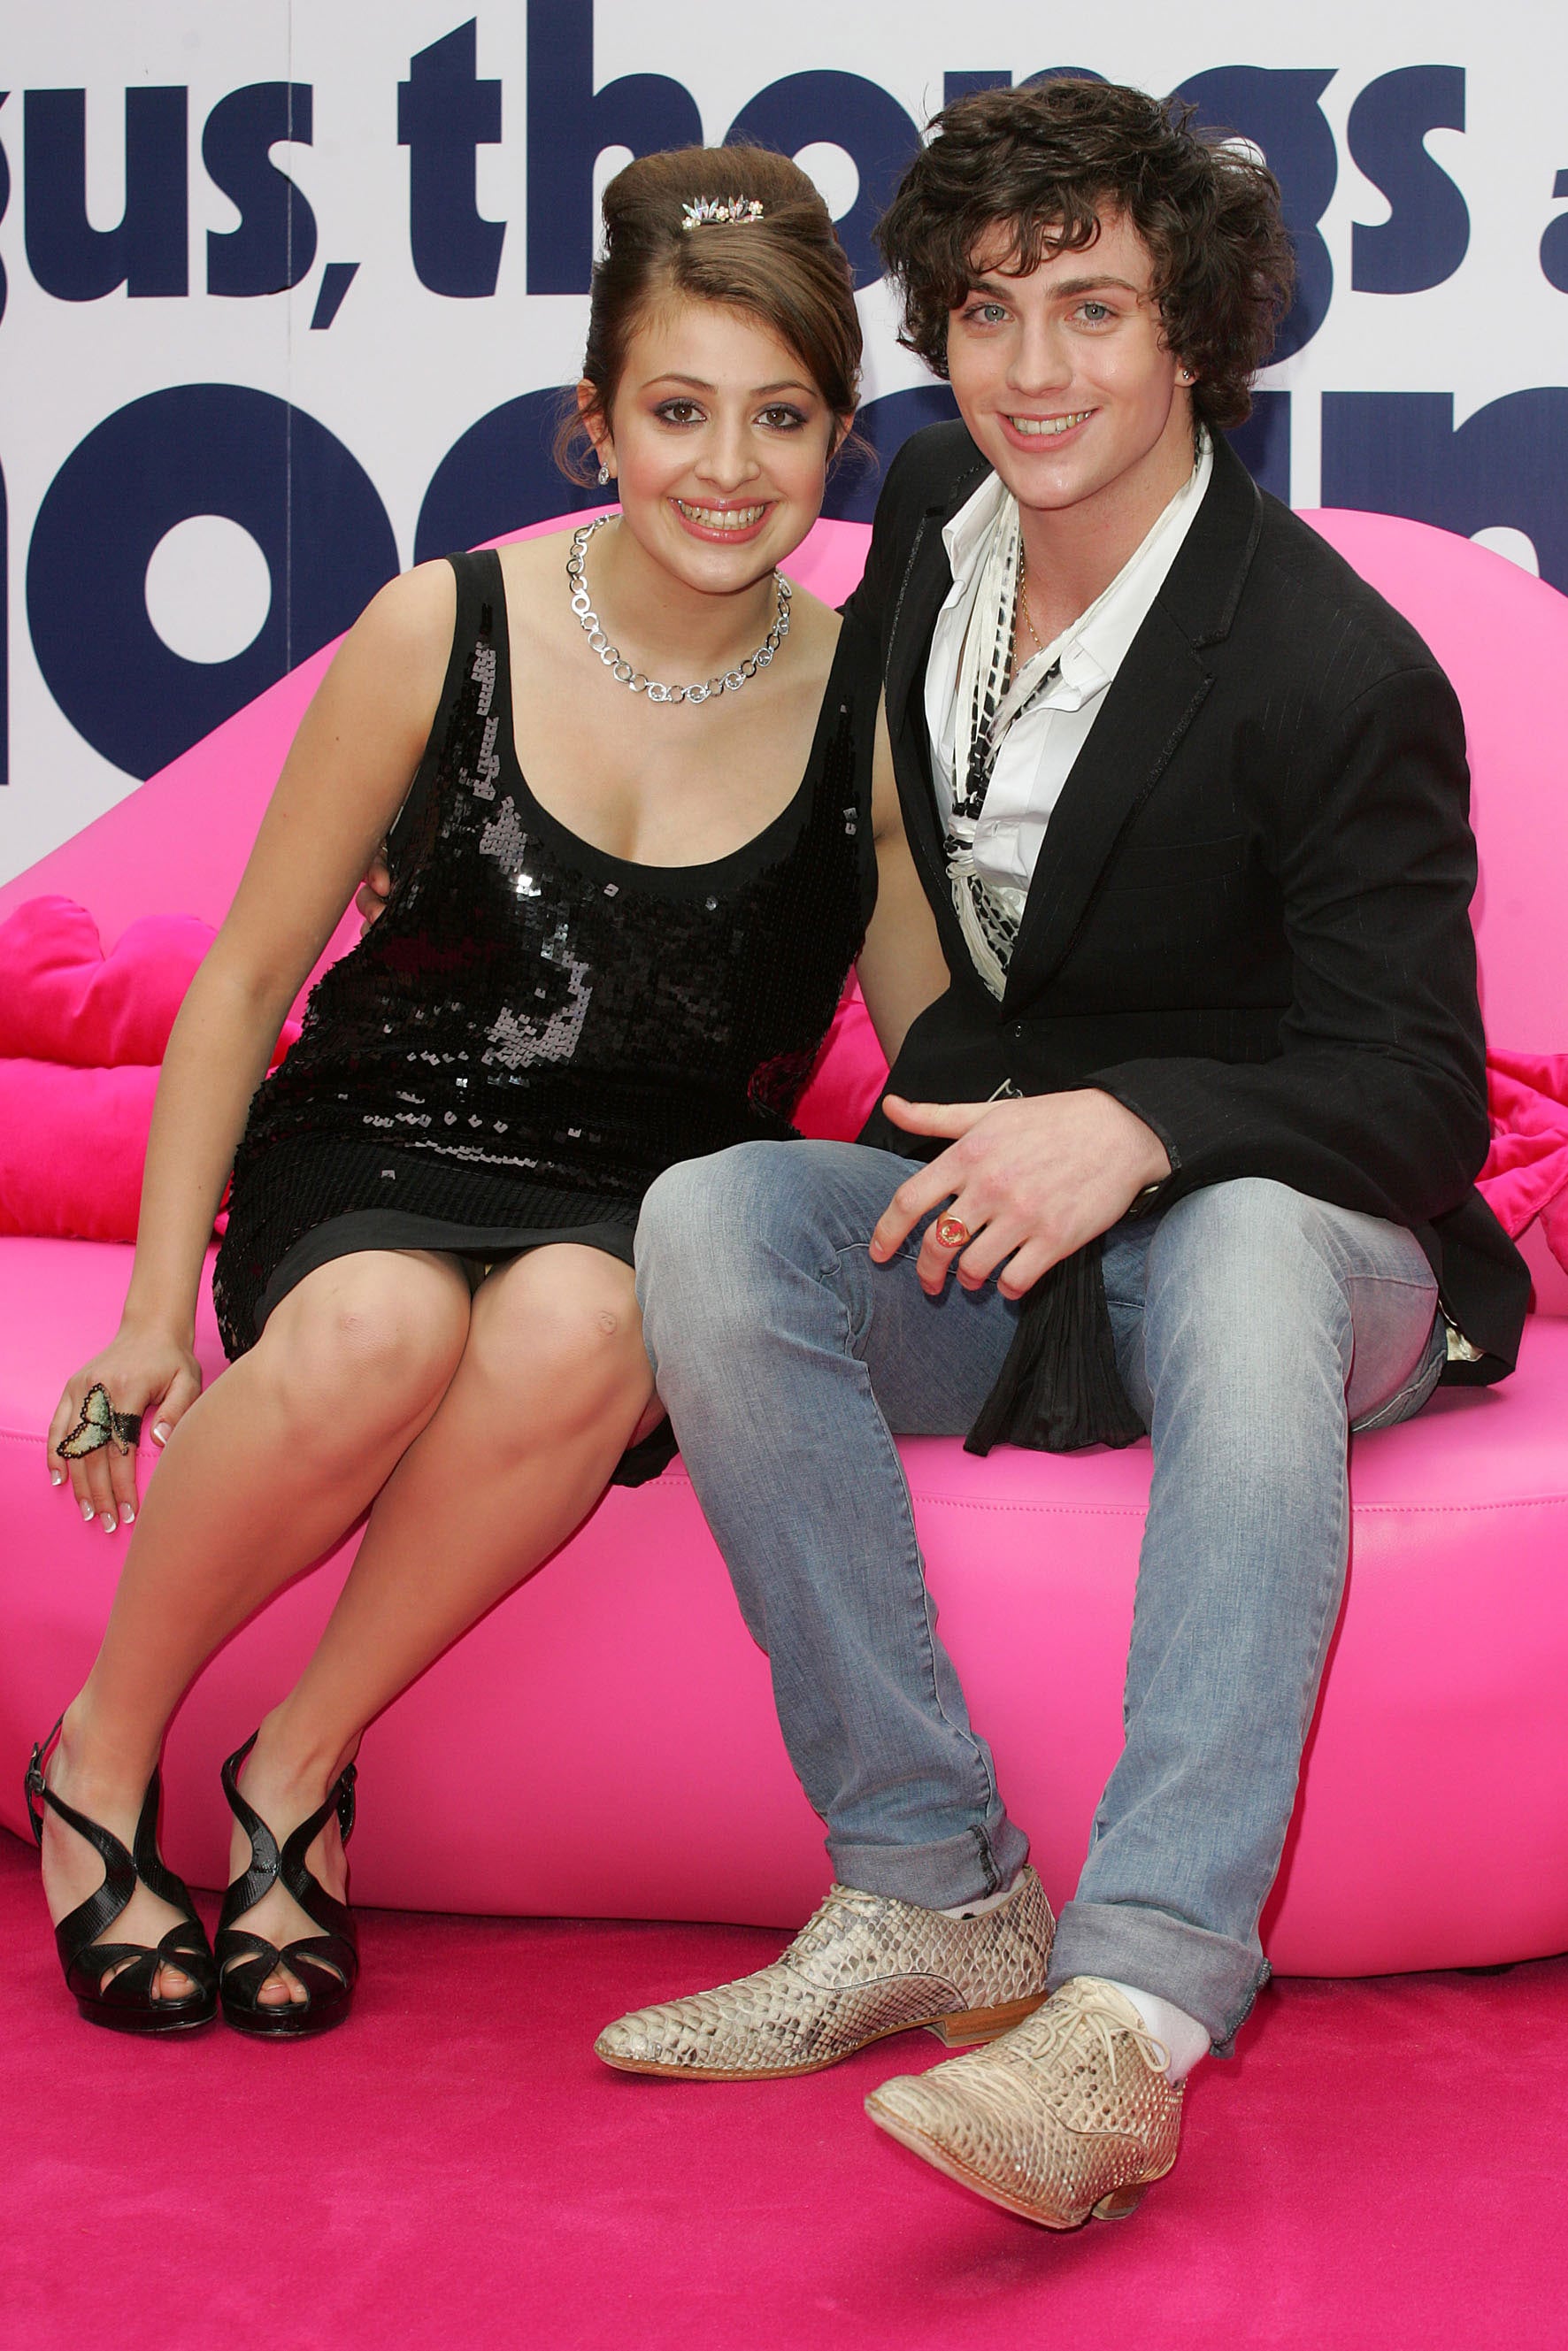 LONDON - JULY 16: Georgia Groome and Aaron Johnson  attend the UK premiere of Angus, Thongs and Perfect Snogging at The Empire Cinema, Leicester Square on July 16, 2008 in London, England. (Photo by Fred Duval/FilmMagic)